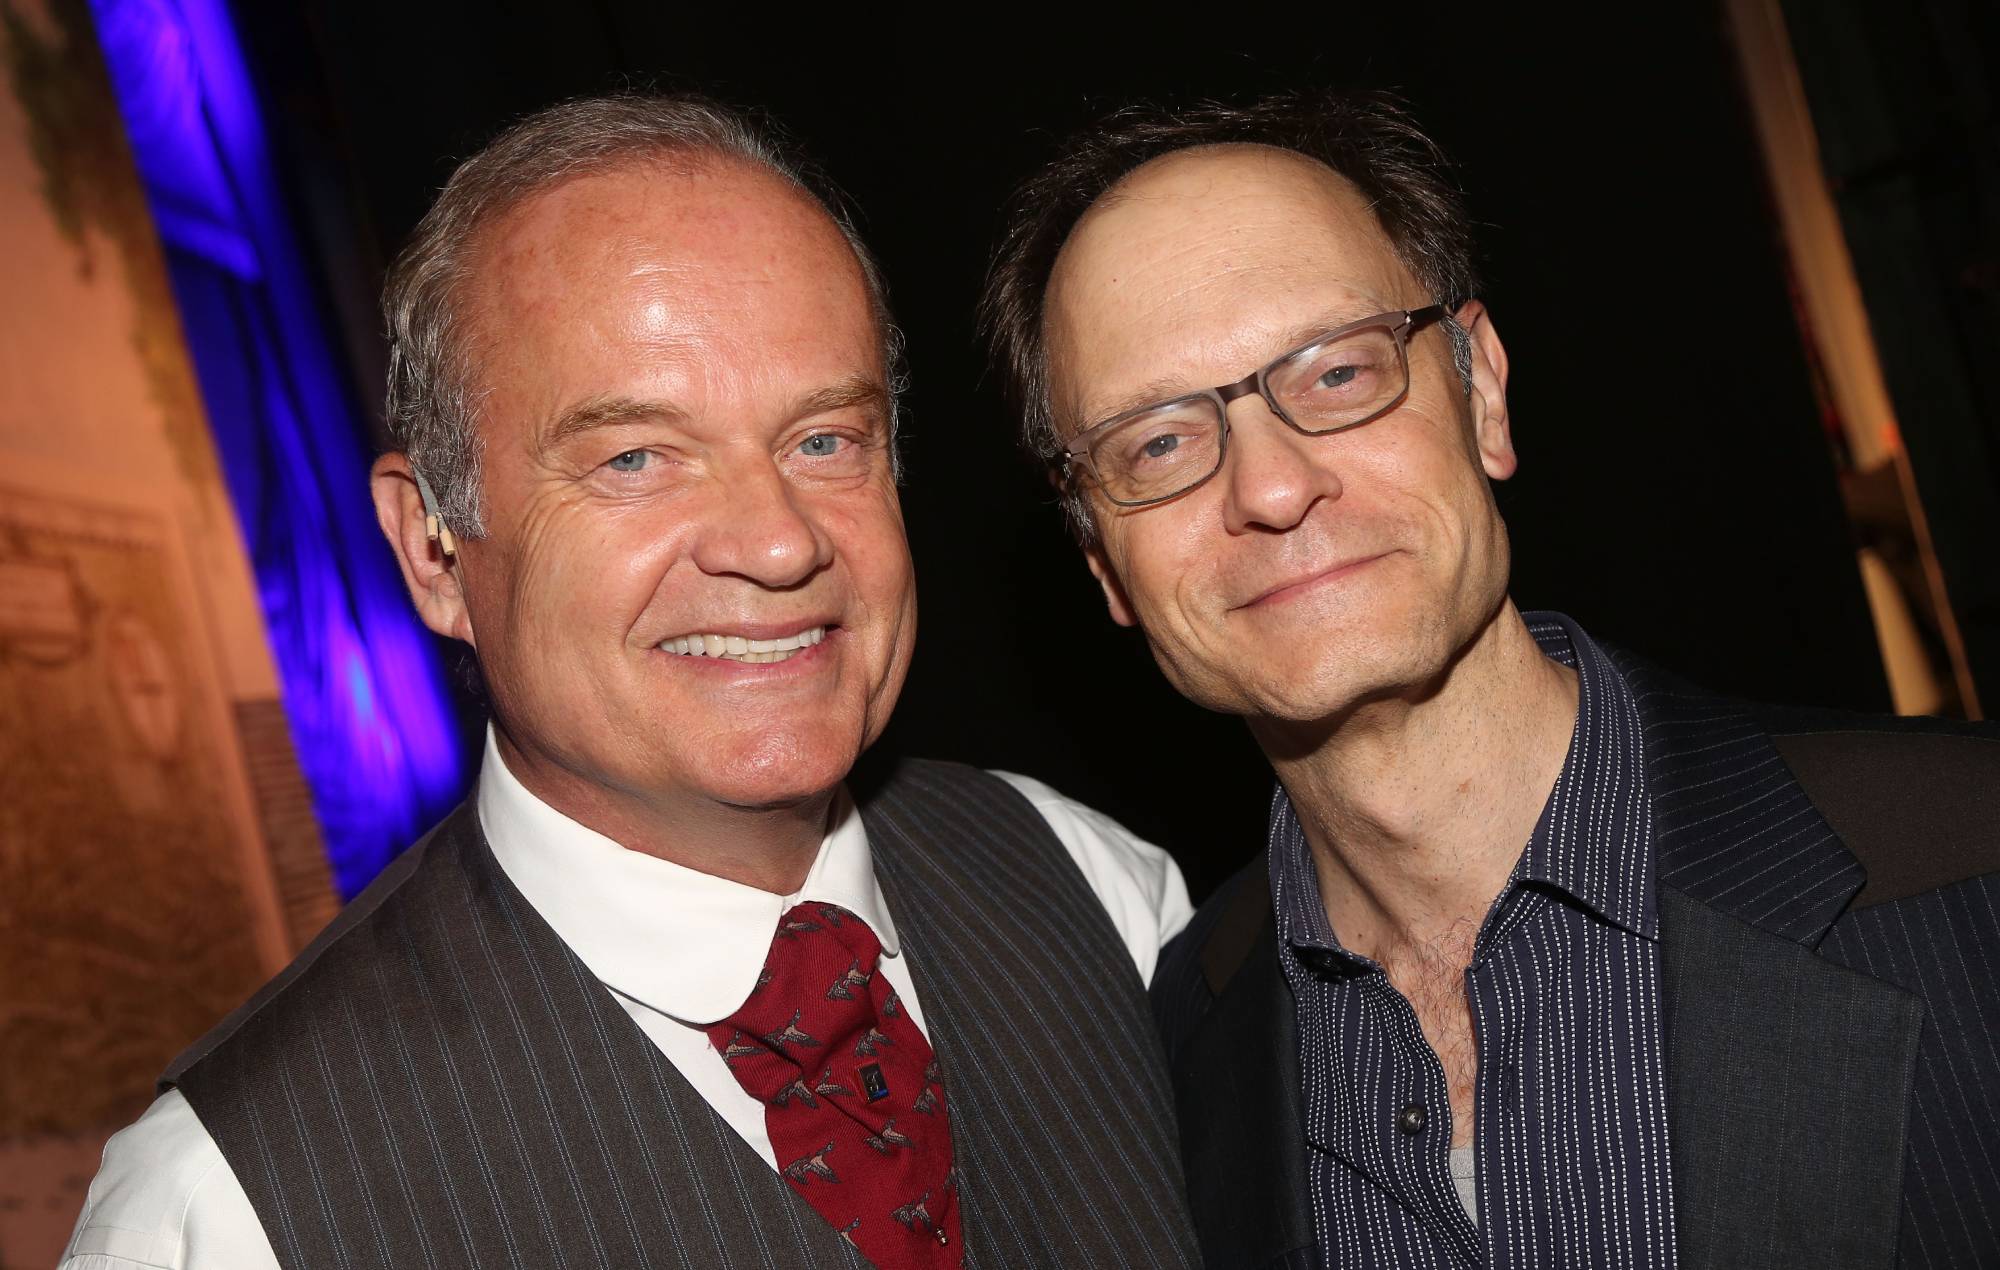 Kelsey Grammer couldn’t convince David Hyde Pierce to do Frasier reboot: “I did my best”